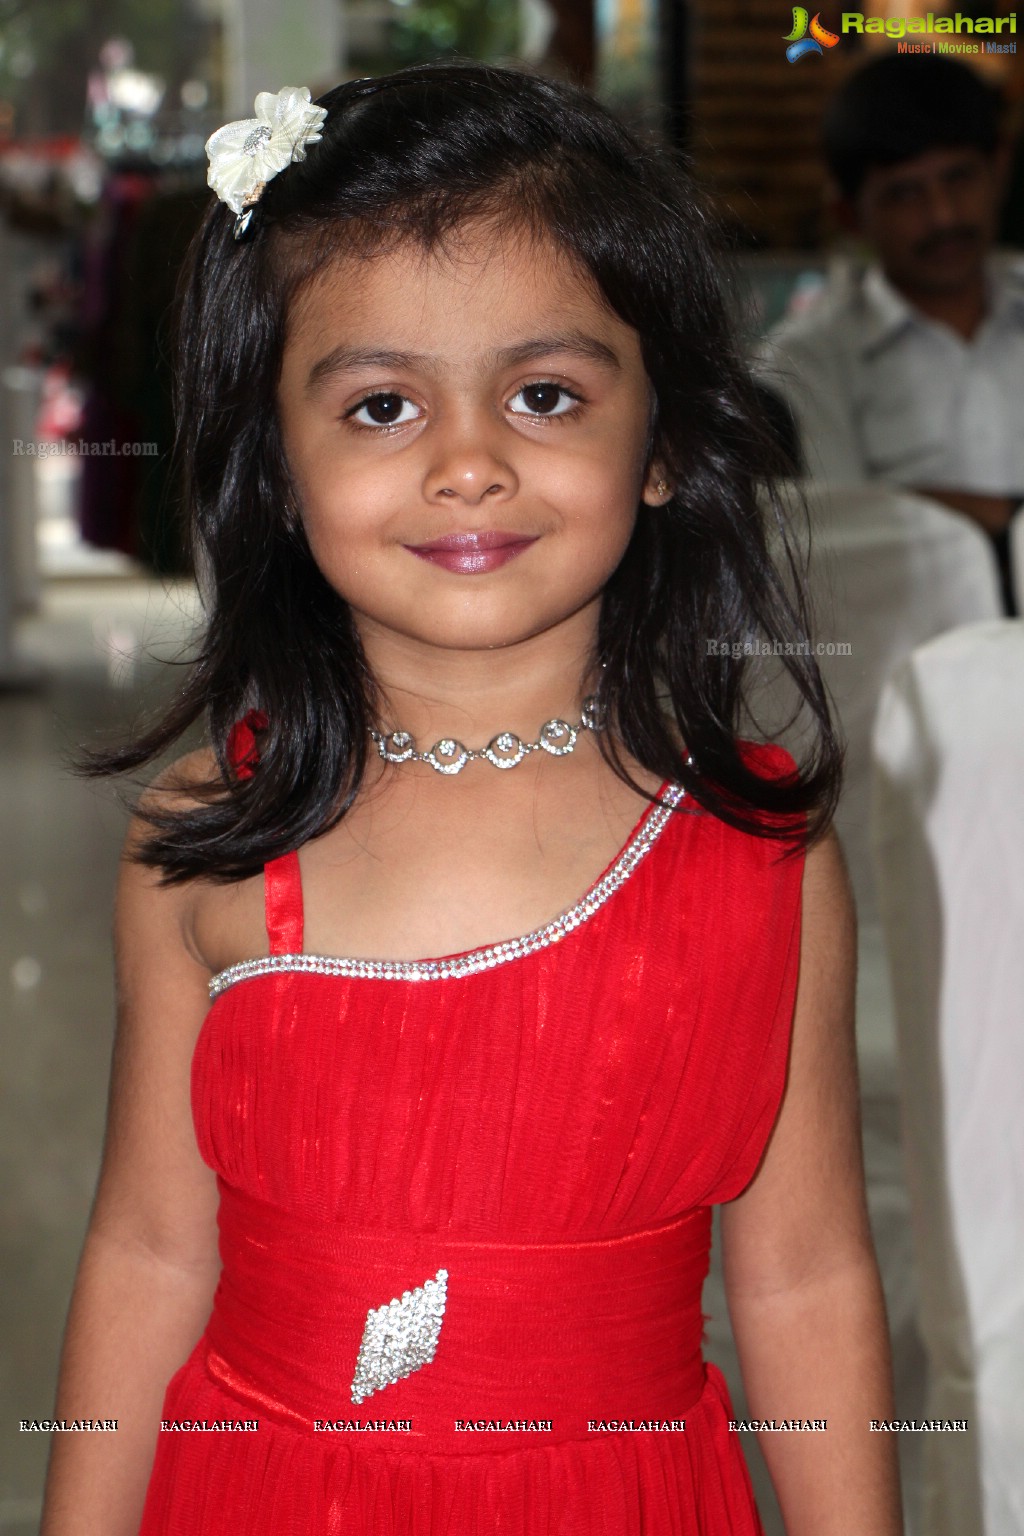 Coupon Launches Kool Kids Fashion Icon With Talented Tollywood Star Priyadarshini